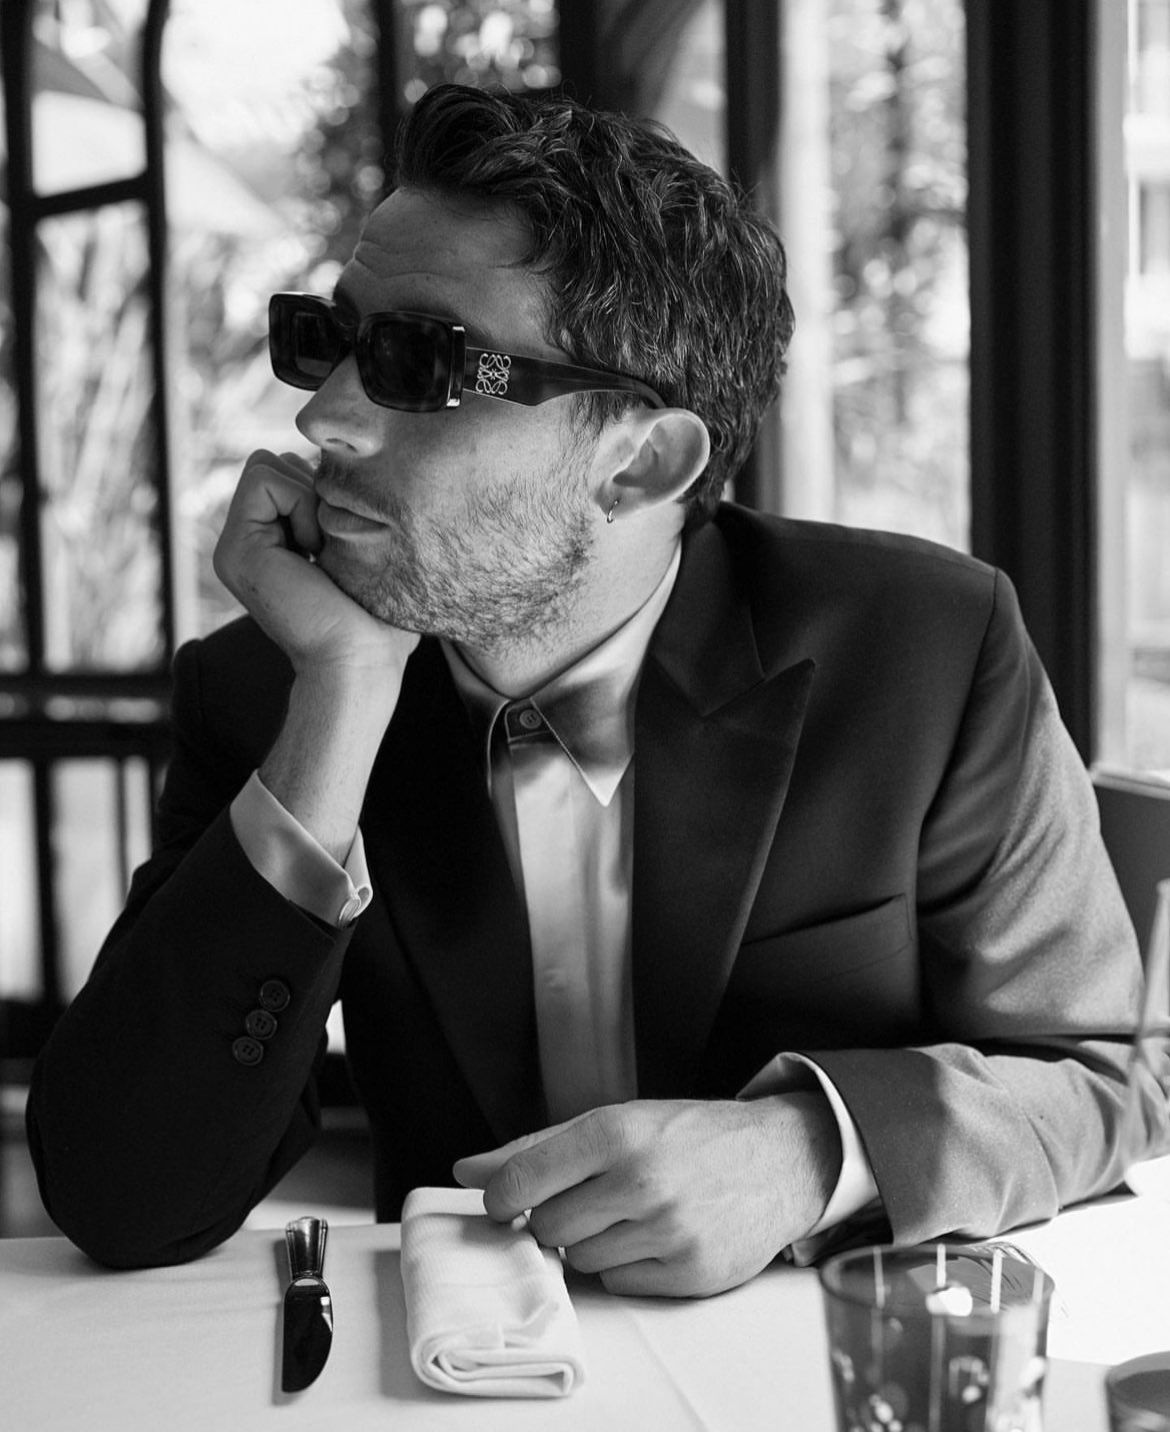 A man in a suit and sunglasses sits at a table - Josh O'Connor